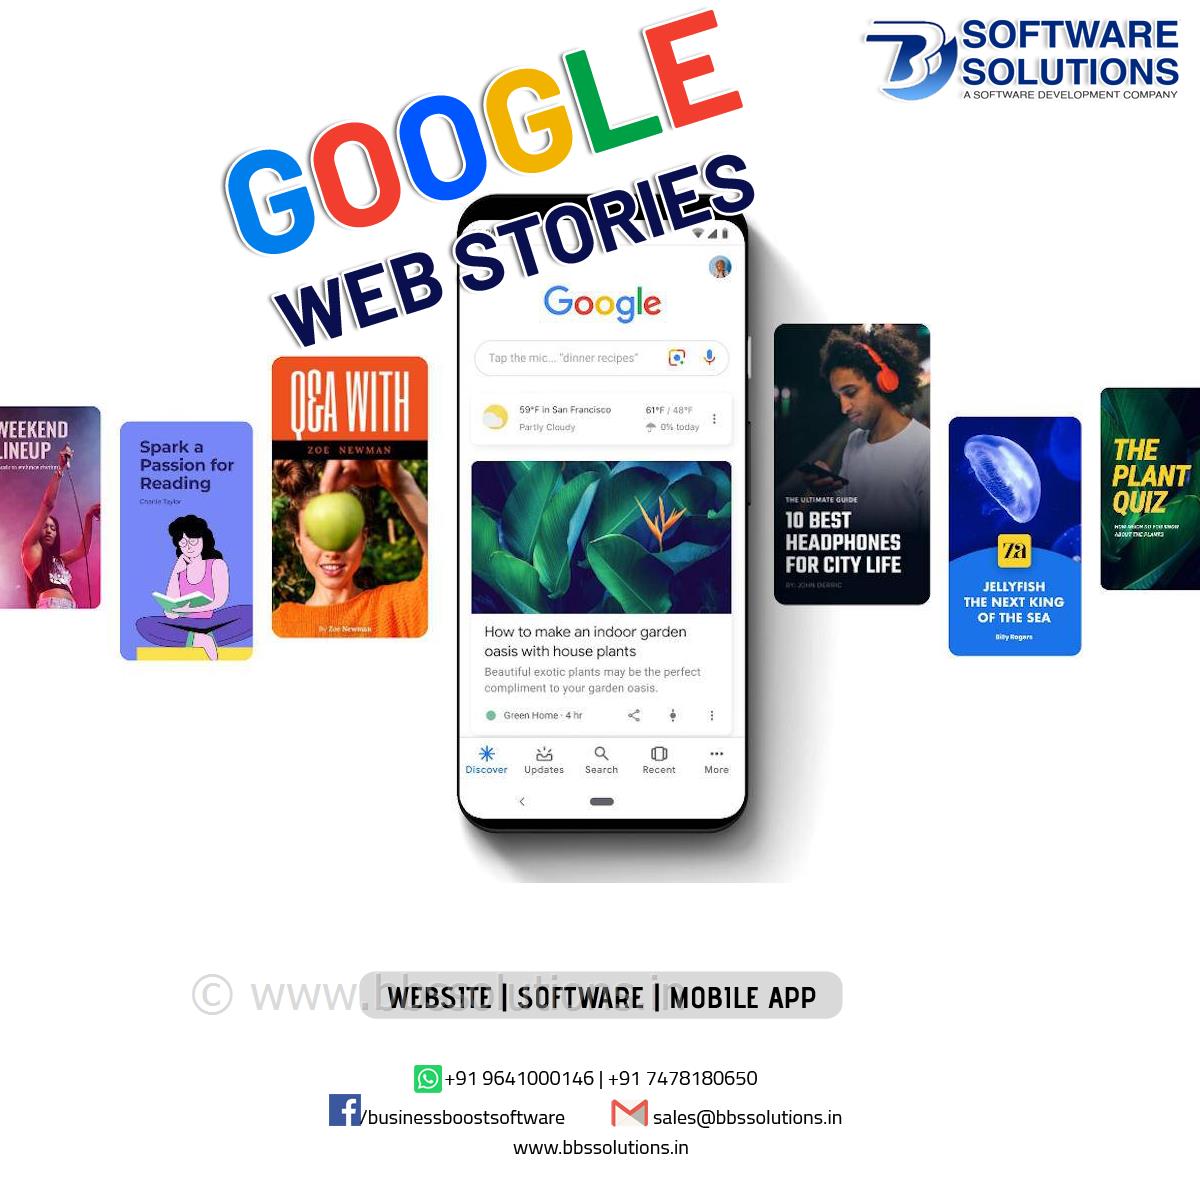 GOOGLE WEB STORIES : HOW TO DYNAMICALLY CREATE MULTIPLE GOOGLE WEB STORIES #2